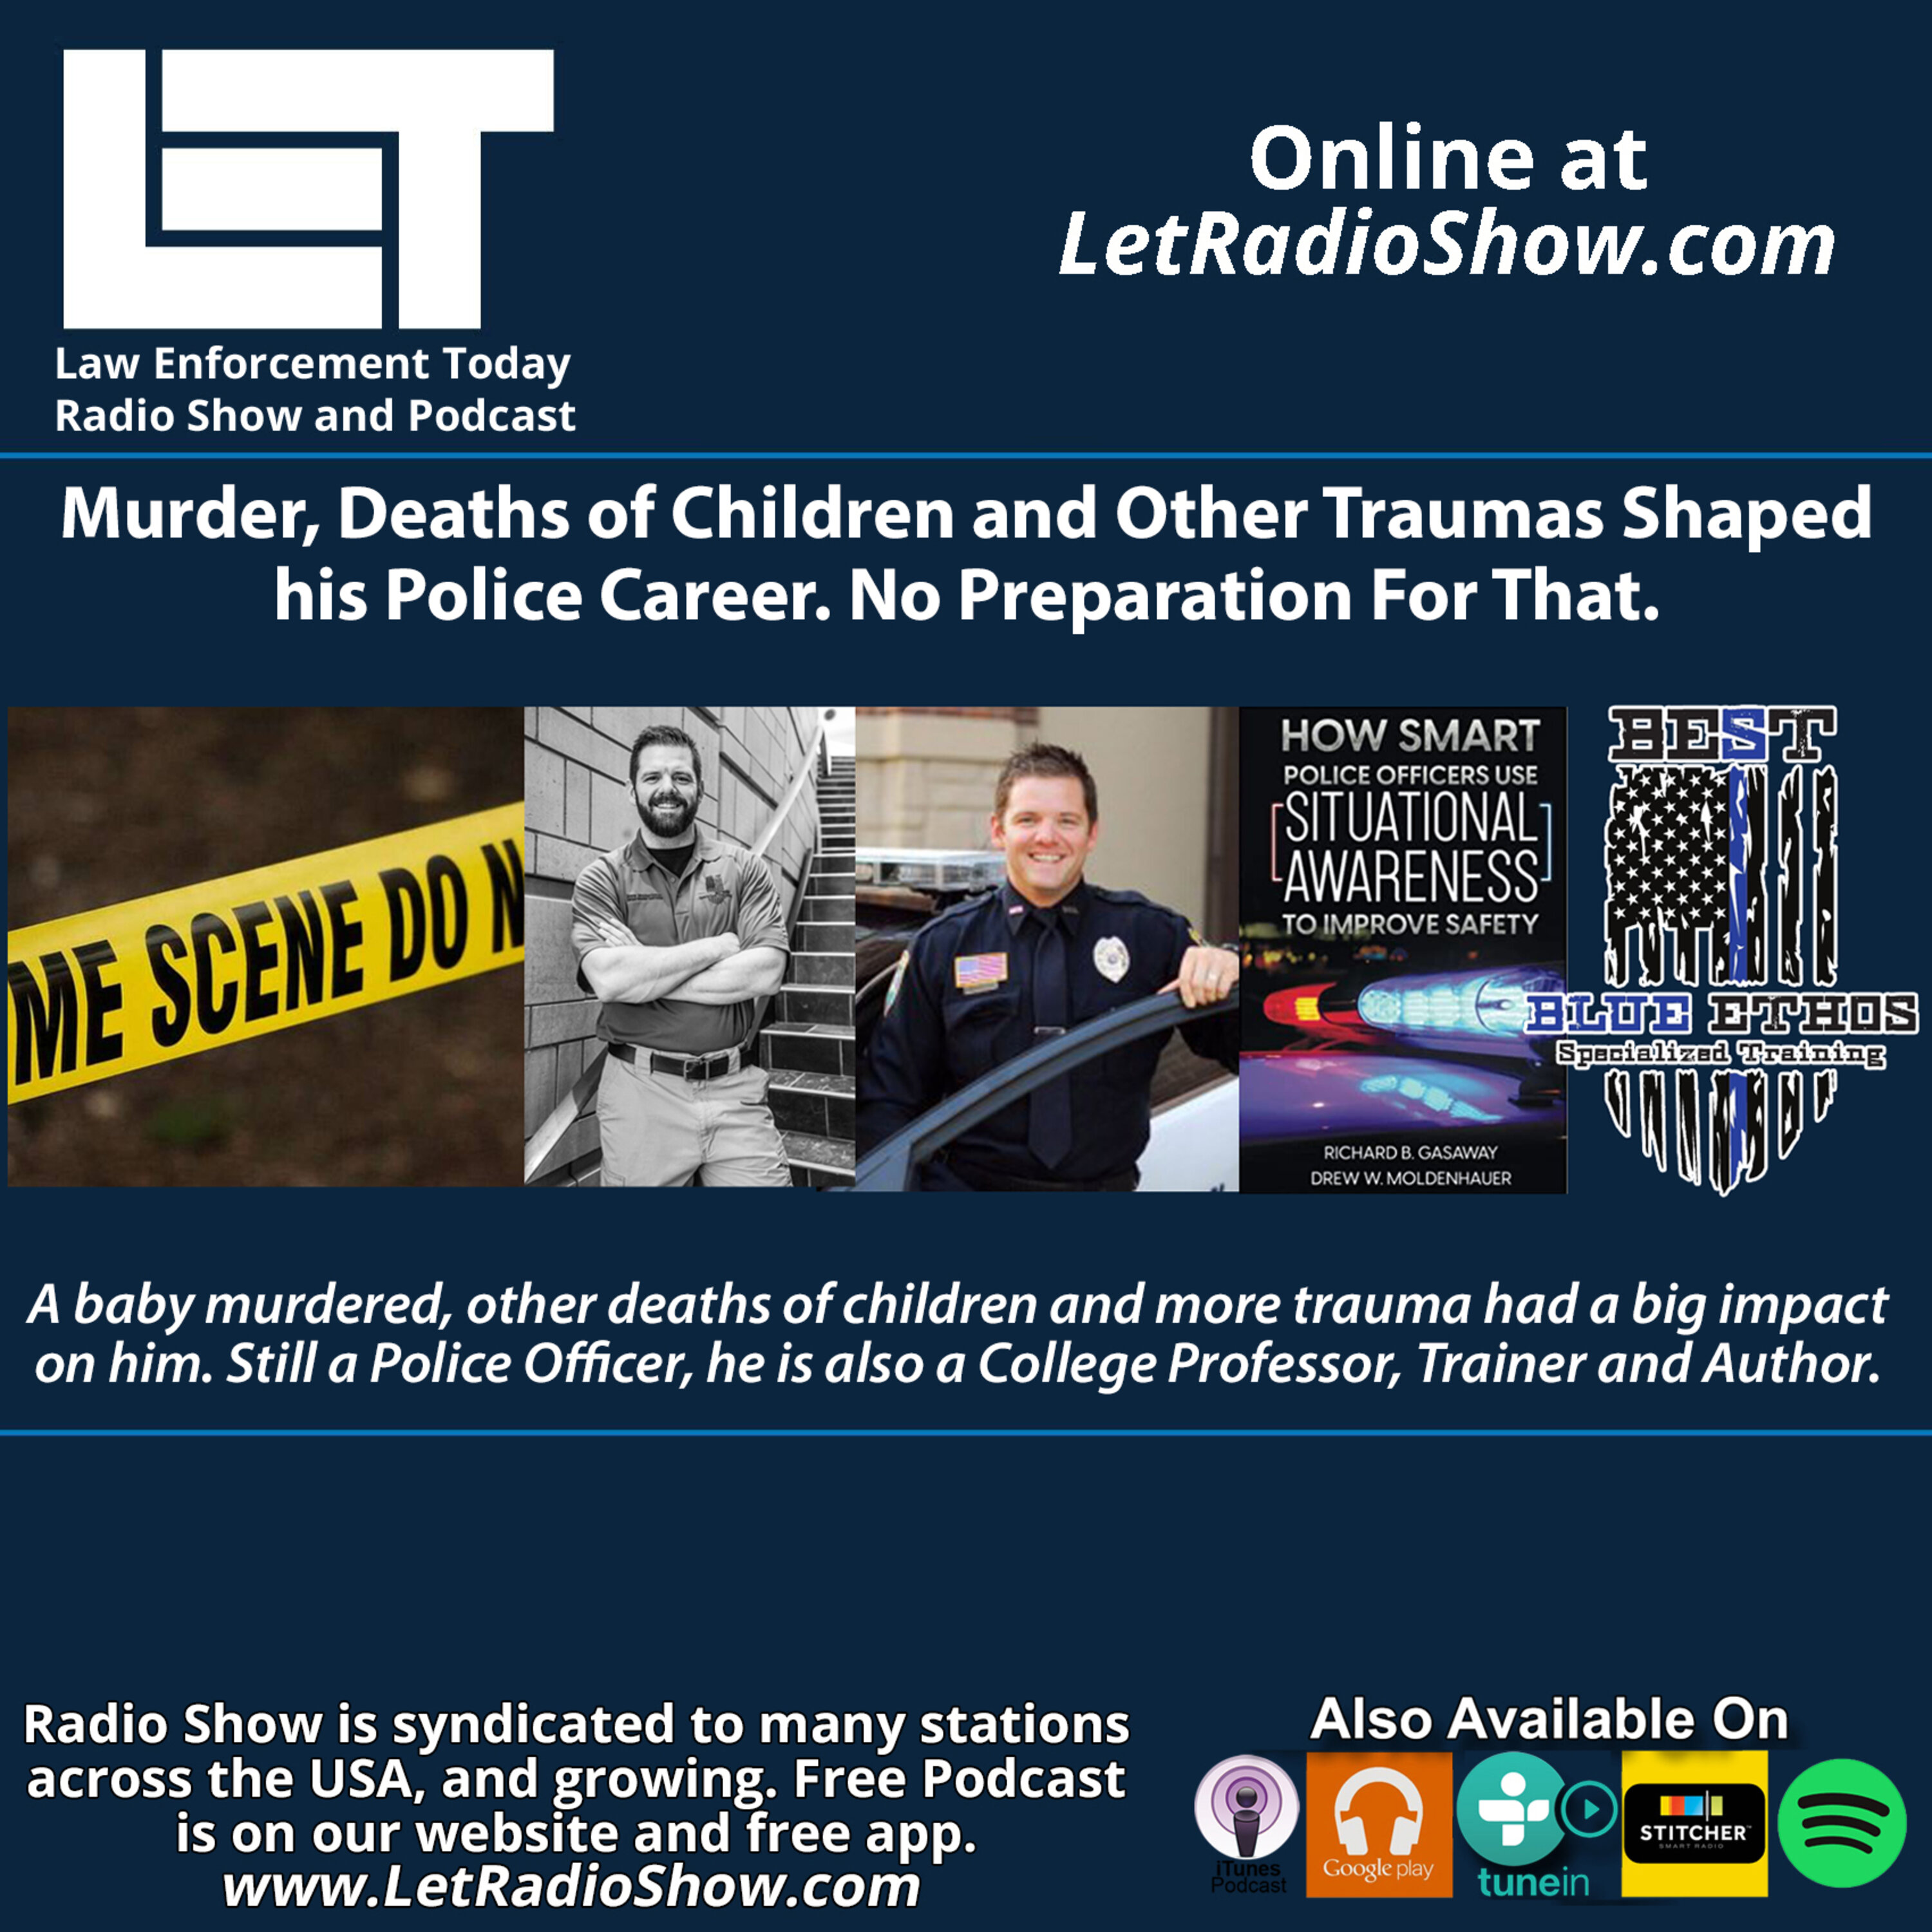 S7E7: Murder, Deaths of Children and Other Traumas Shaped his Police Career. There's No Preparation For That. Image